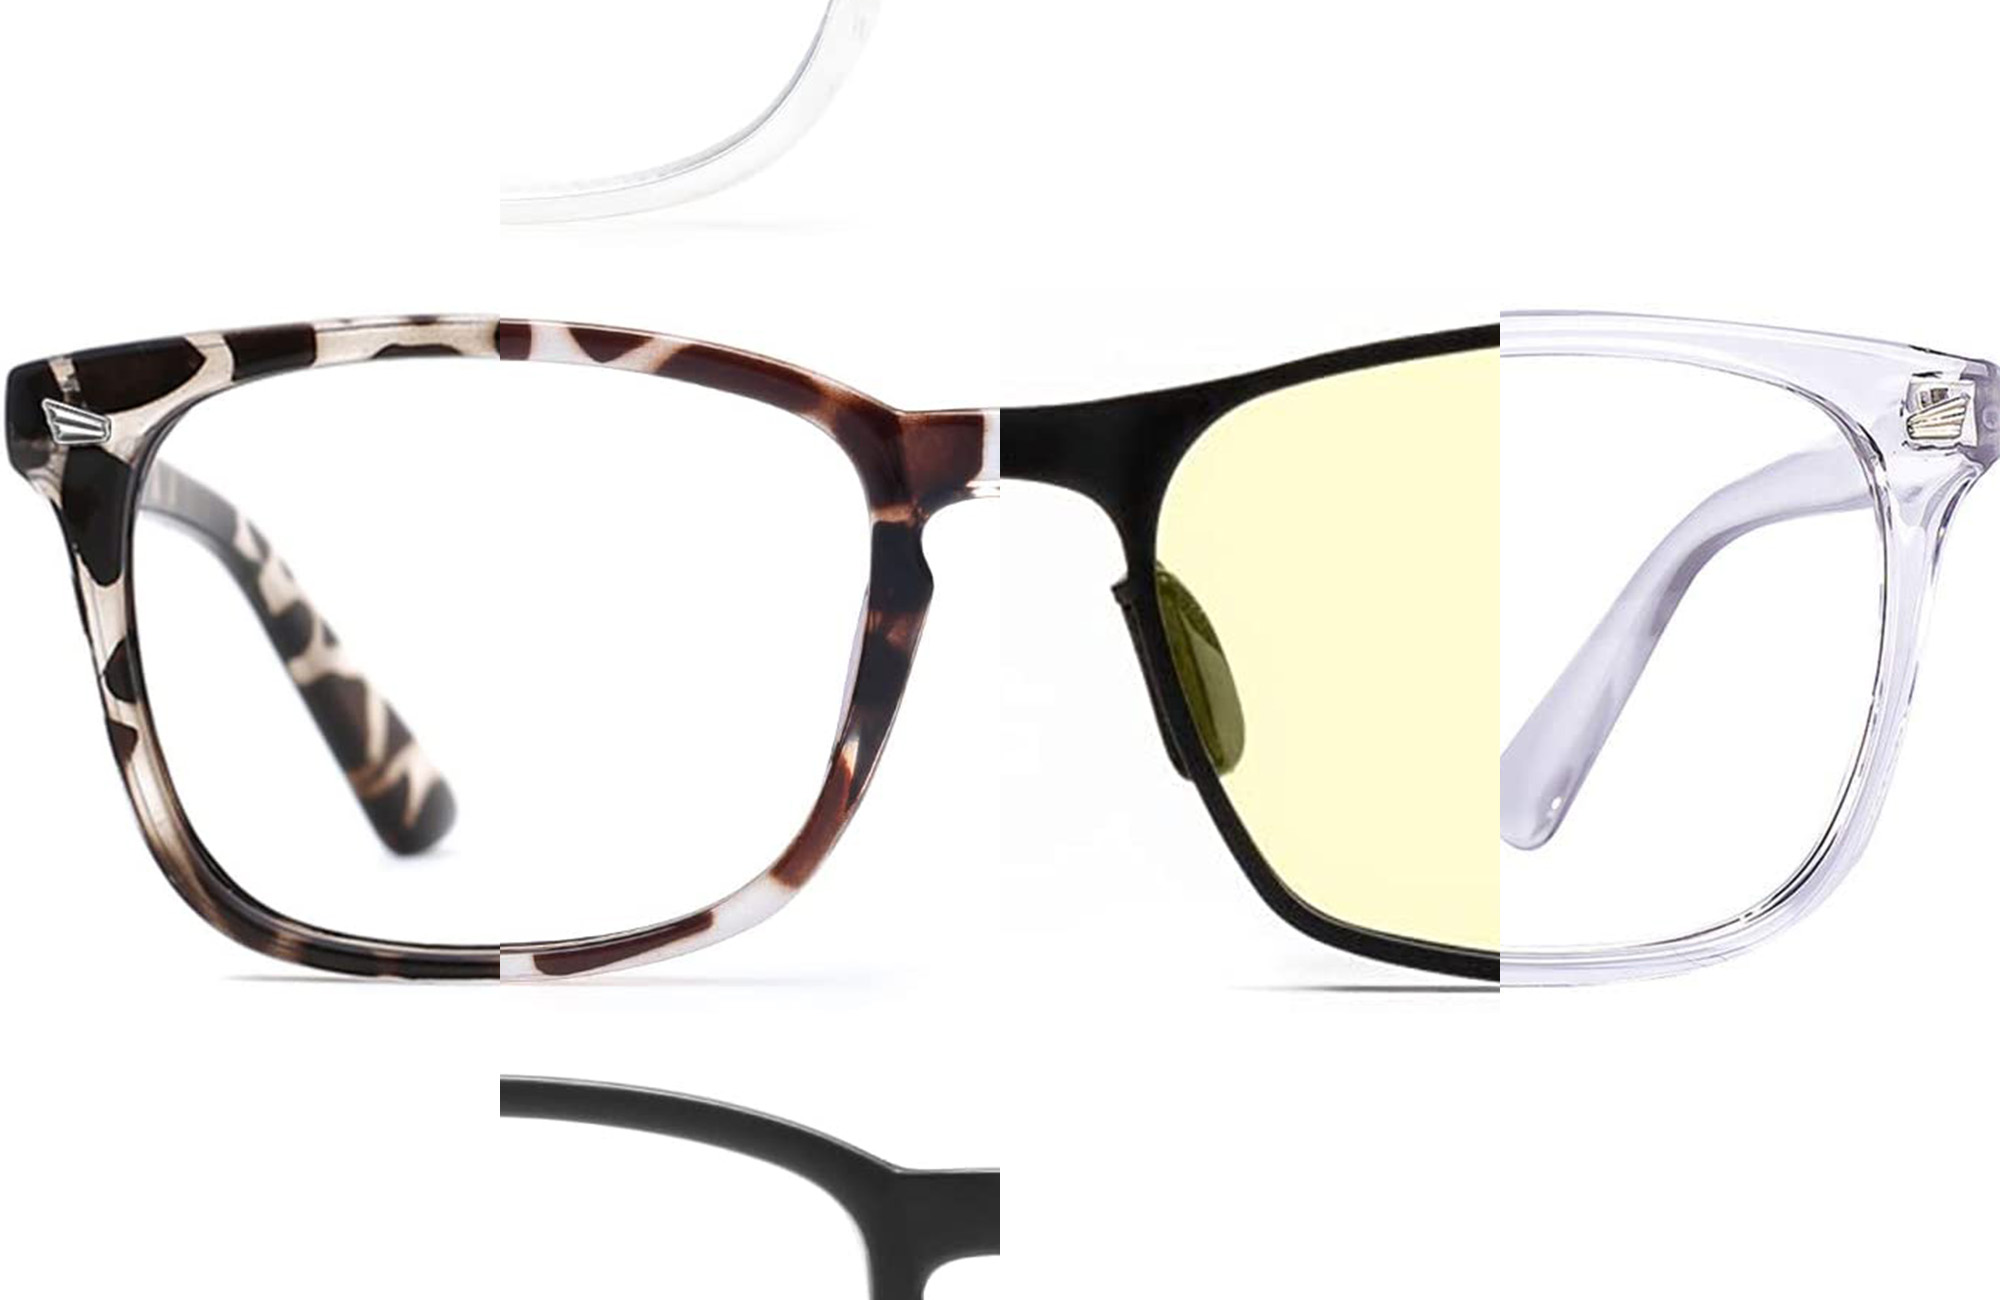 These glasses help reduce eye strain — and TODAY editors love them